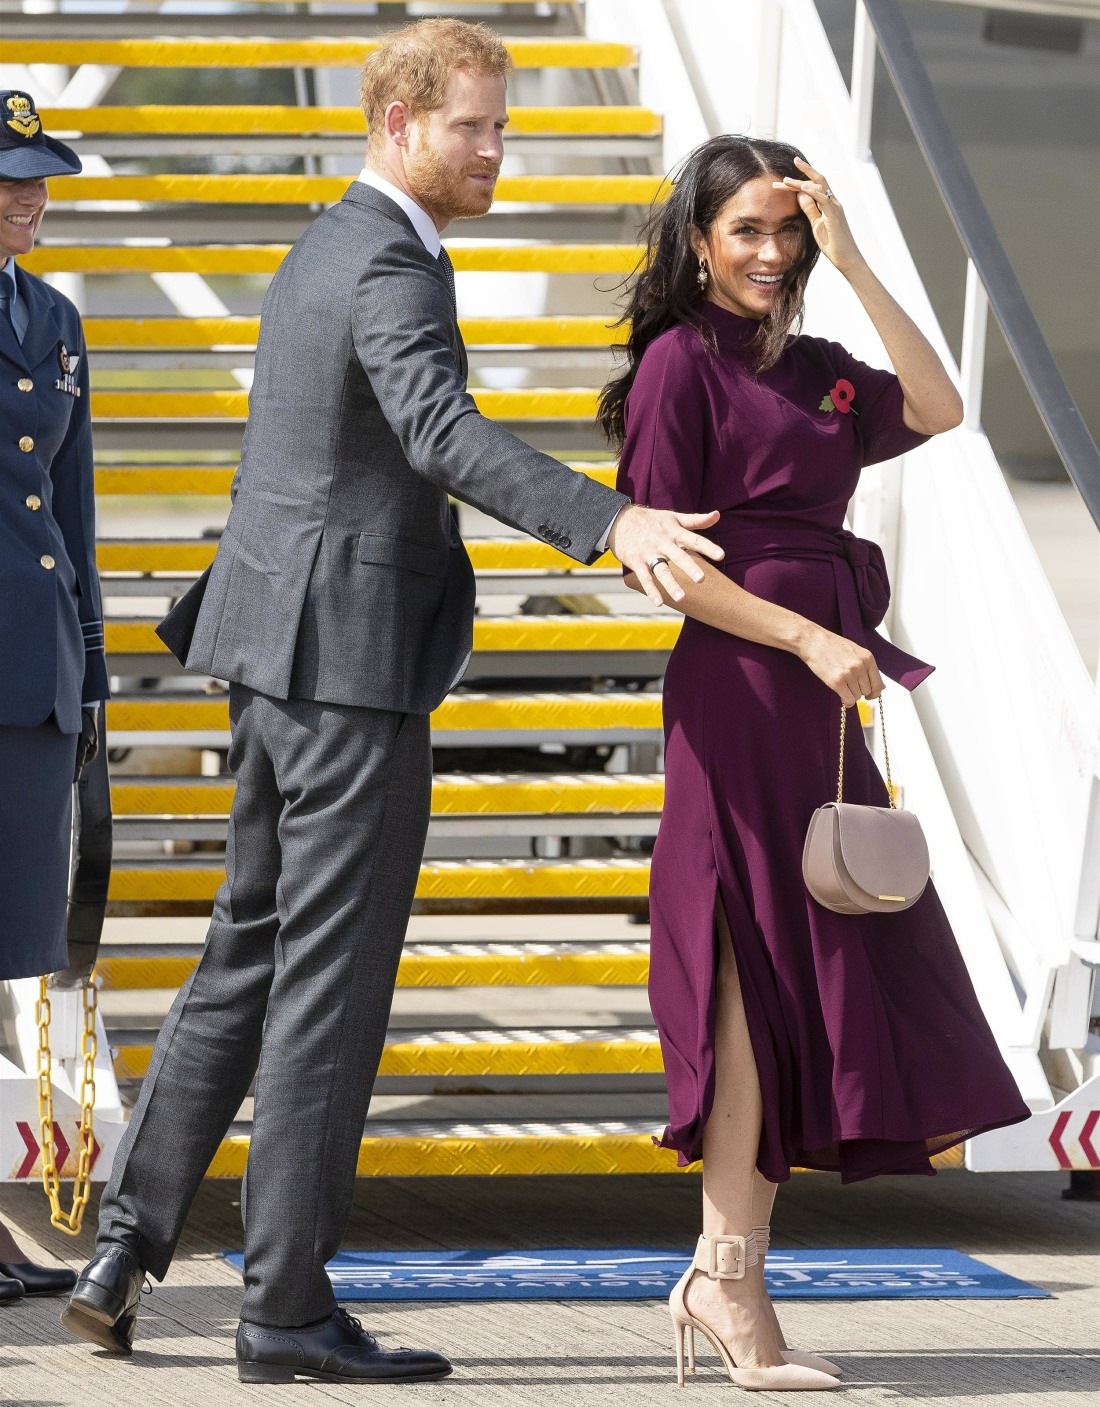 The Duke and Duchess of Sussex board a flight to New Zealand